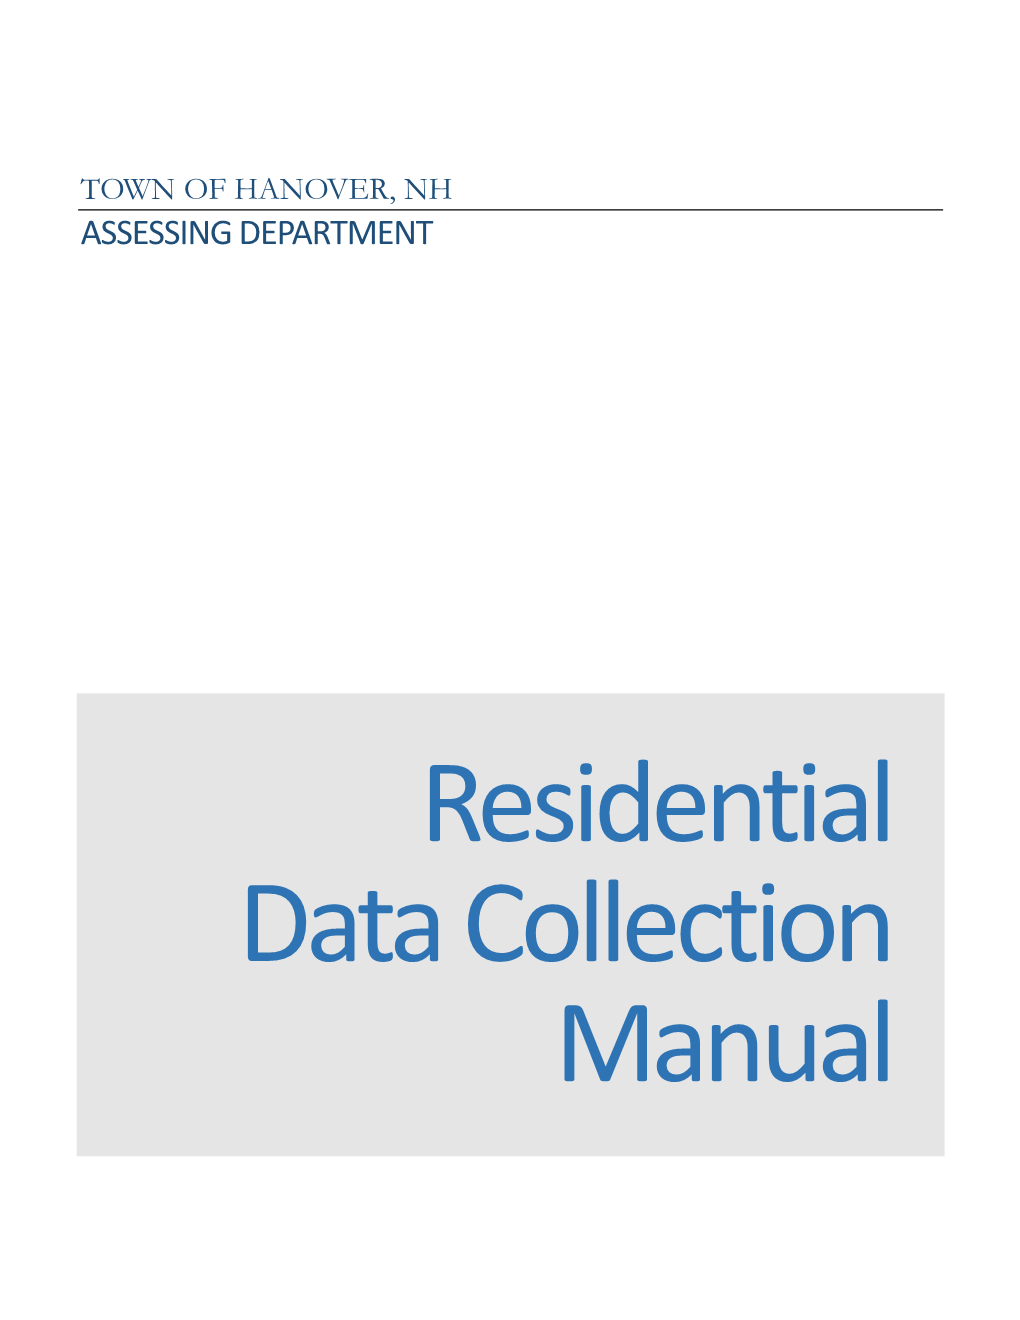 Residential Data Collection Manual